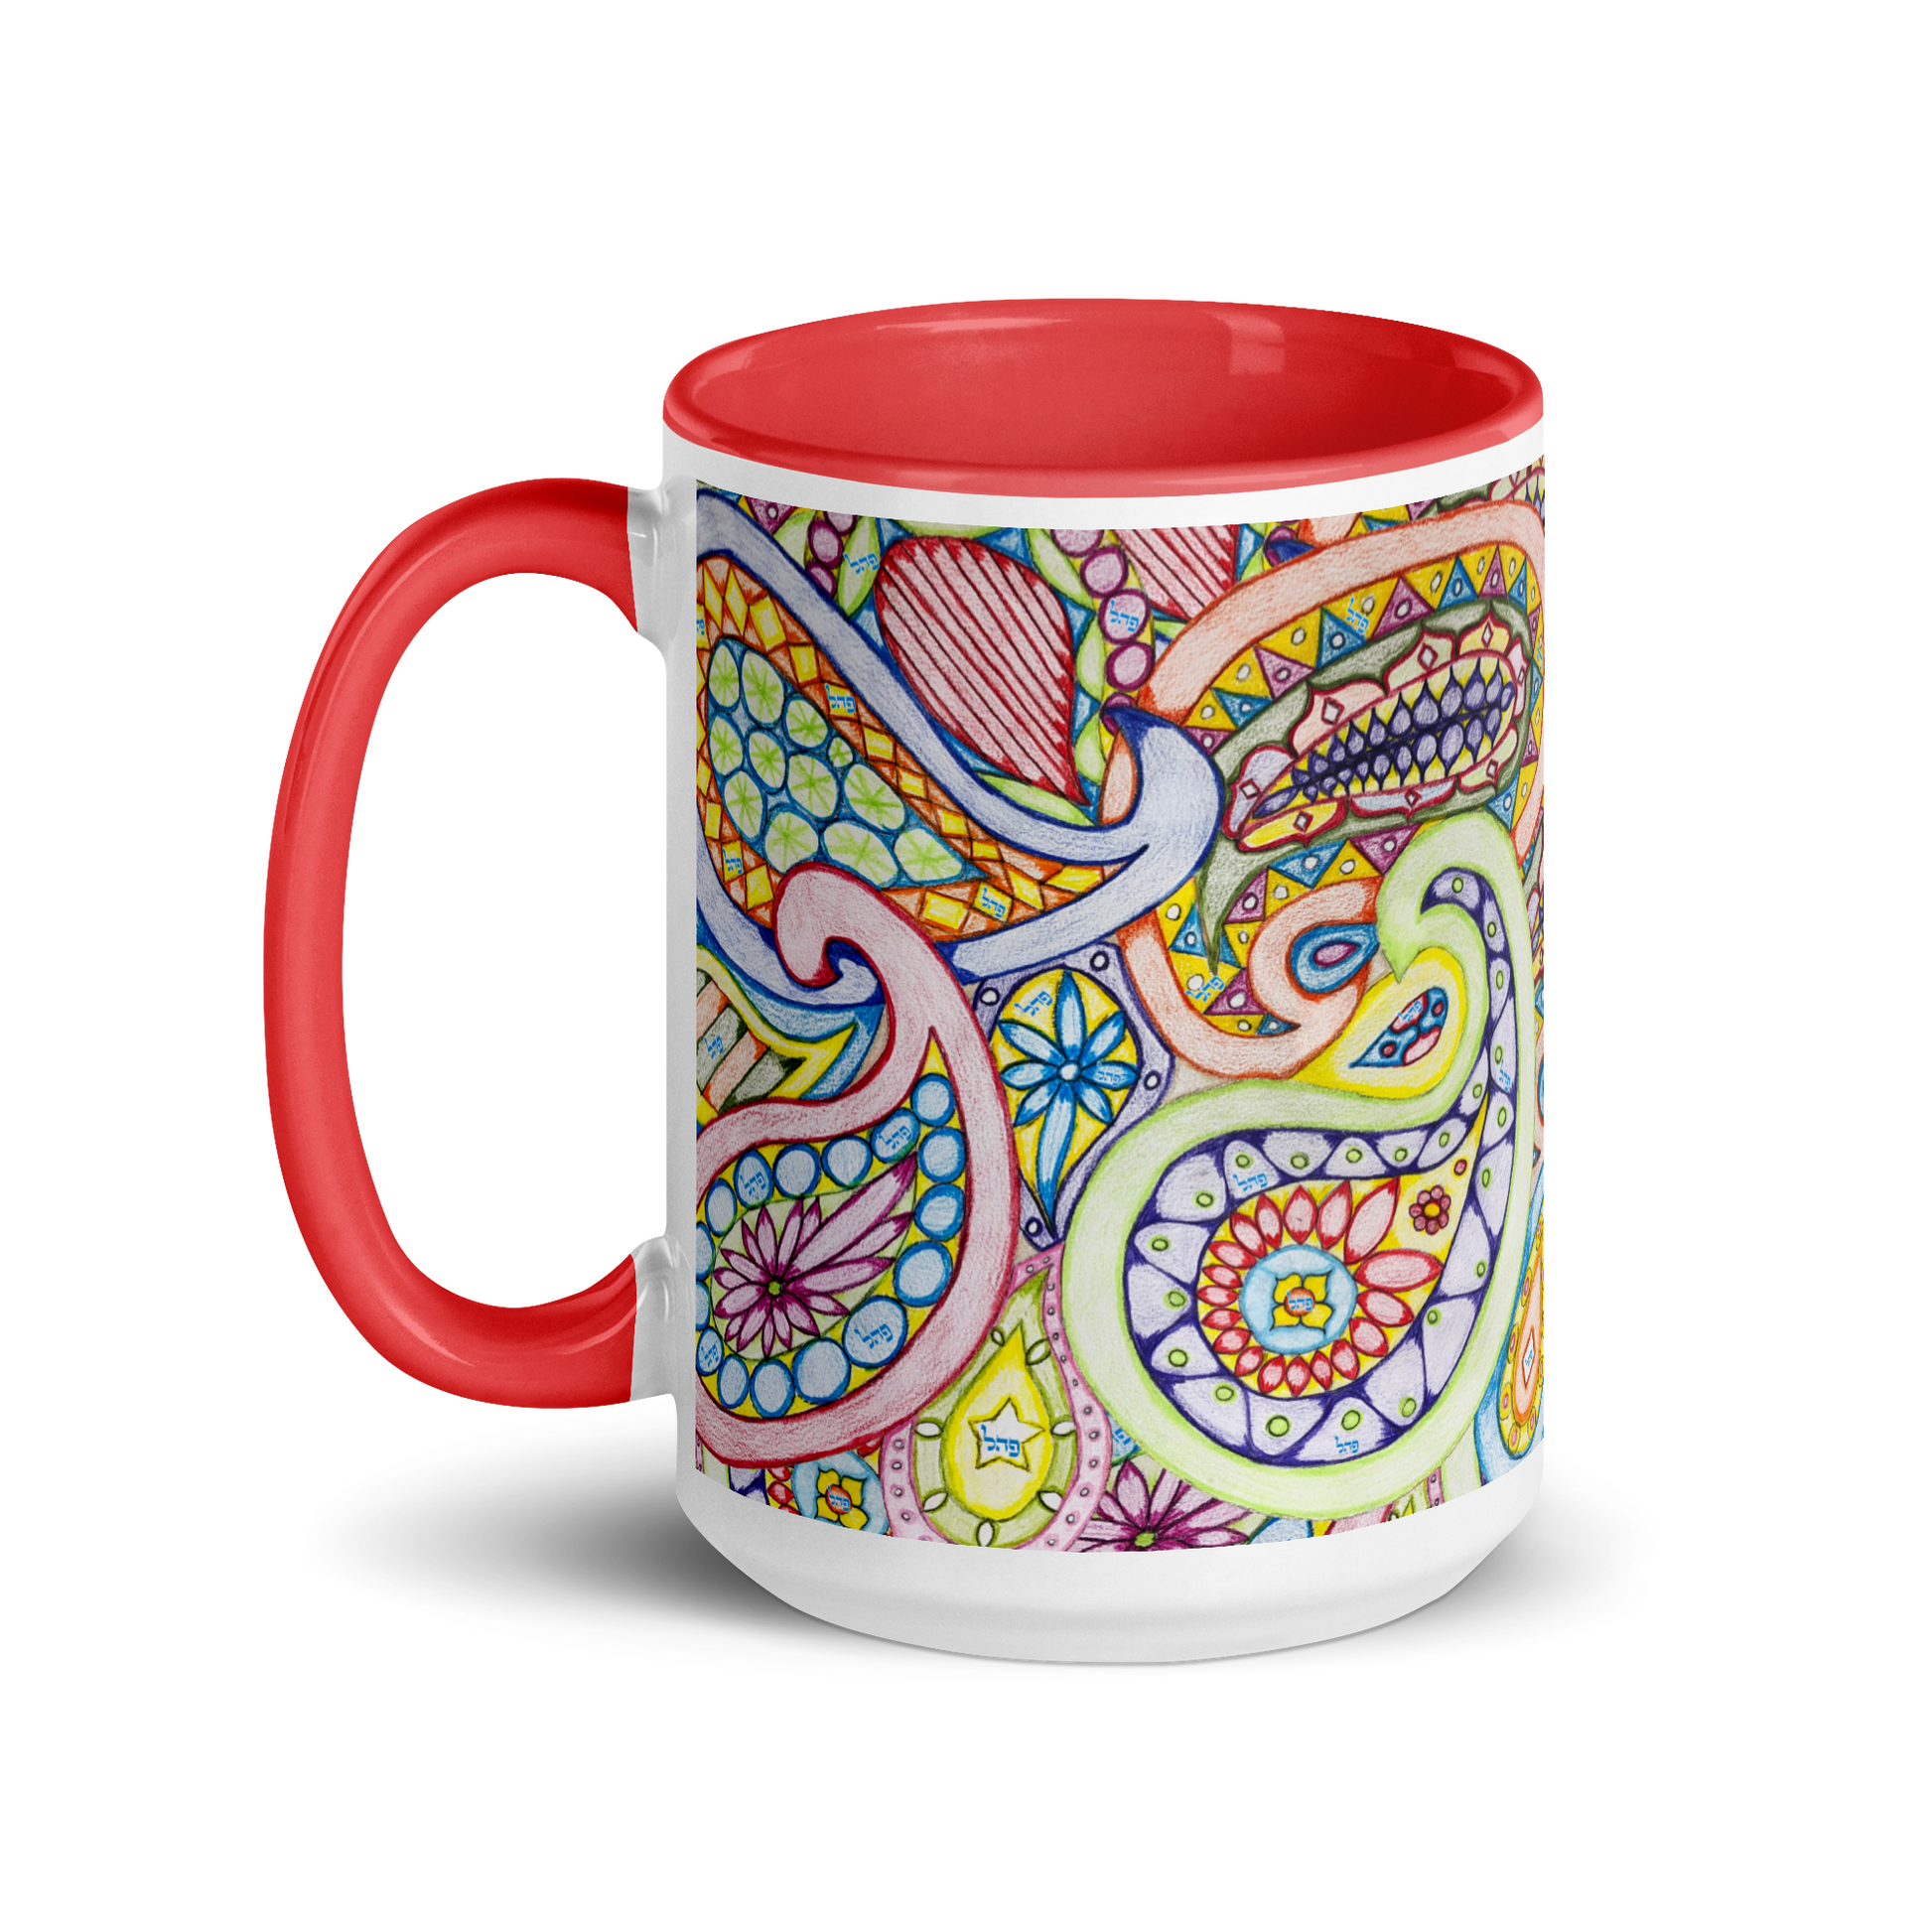  Mug-with-Color-Inside-15oz-Red-Remove-Addictions-(72-Names-of-God-Pey-Hey-Lamed)-3-137online.com